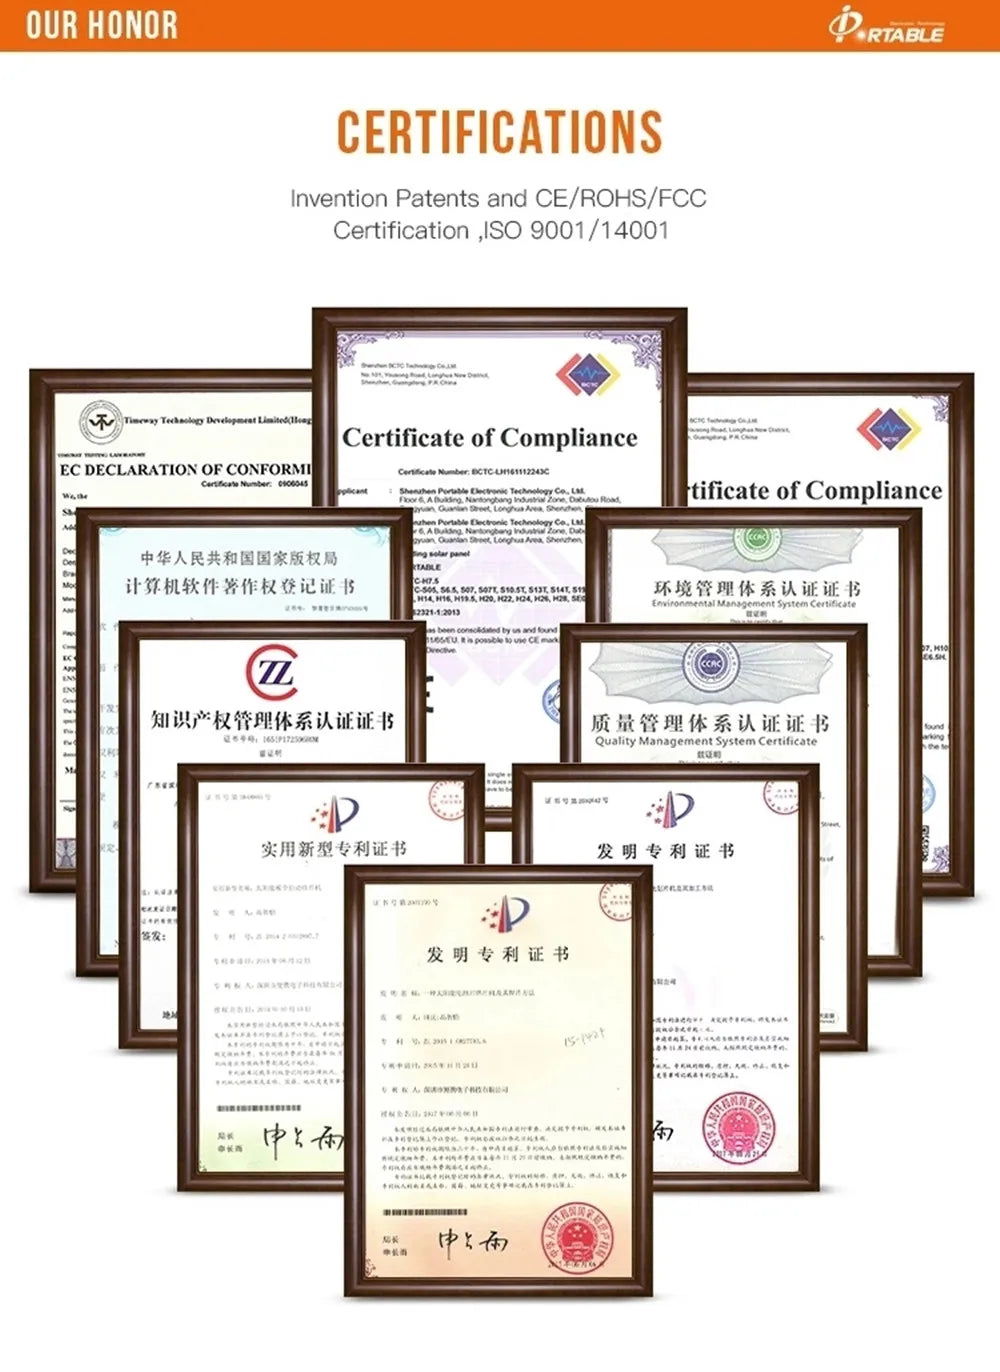 JINGYANG long lasting Semi Flexible solar panel, Certified solar panels with patents, CE/RoHS/FCC, ISO 9001/14001, and EC Declaration of Conformity.